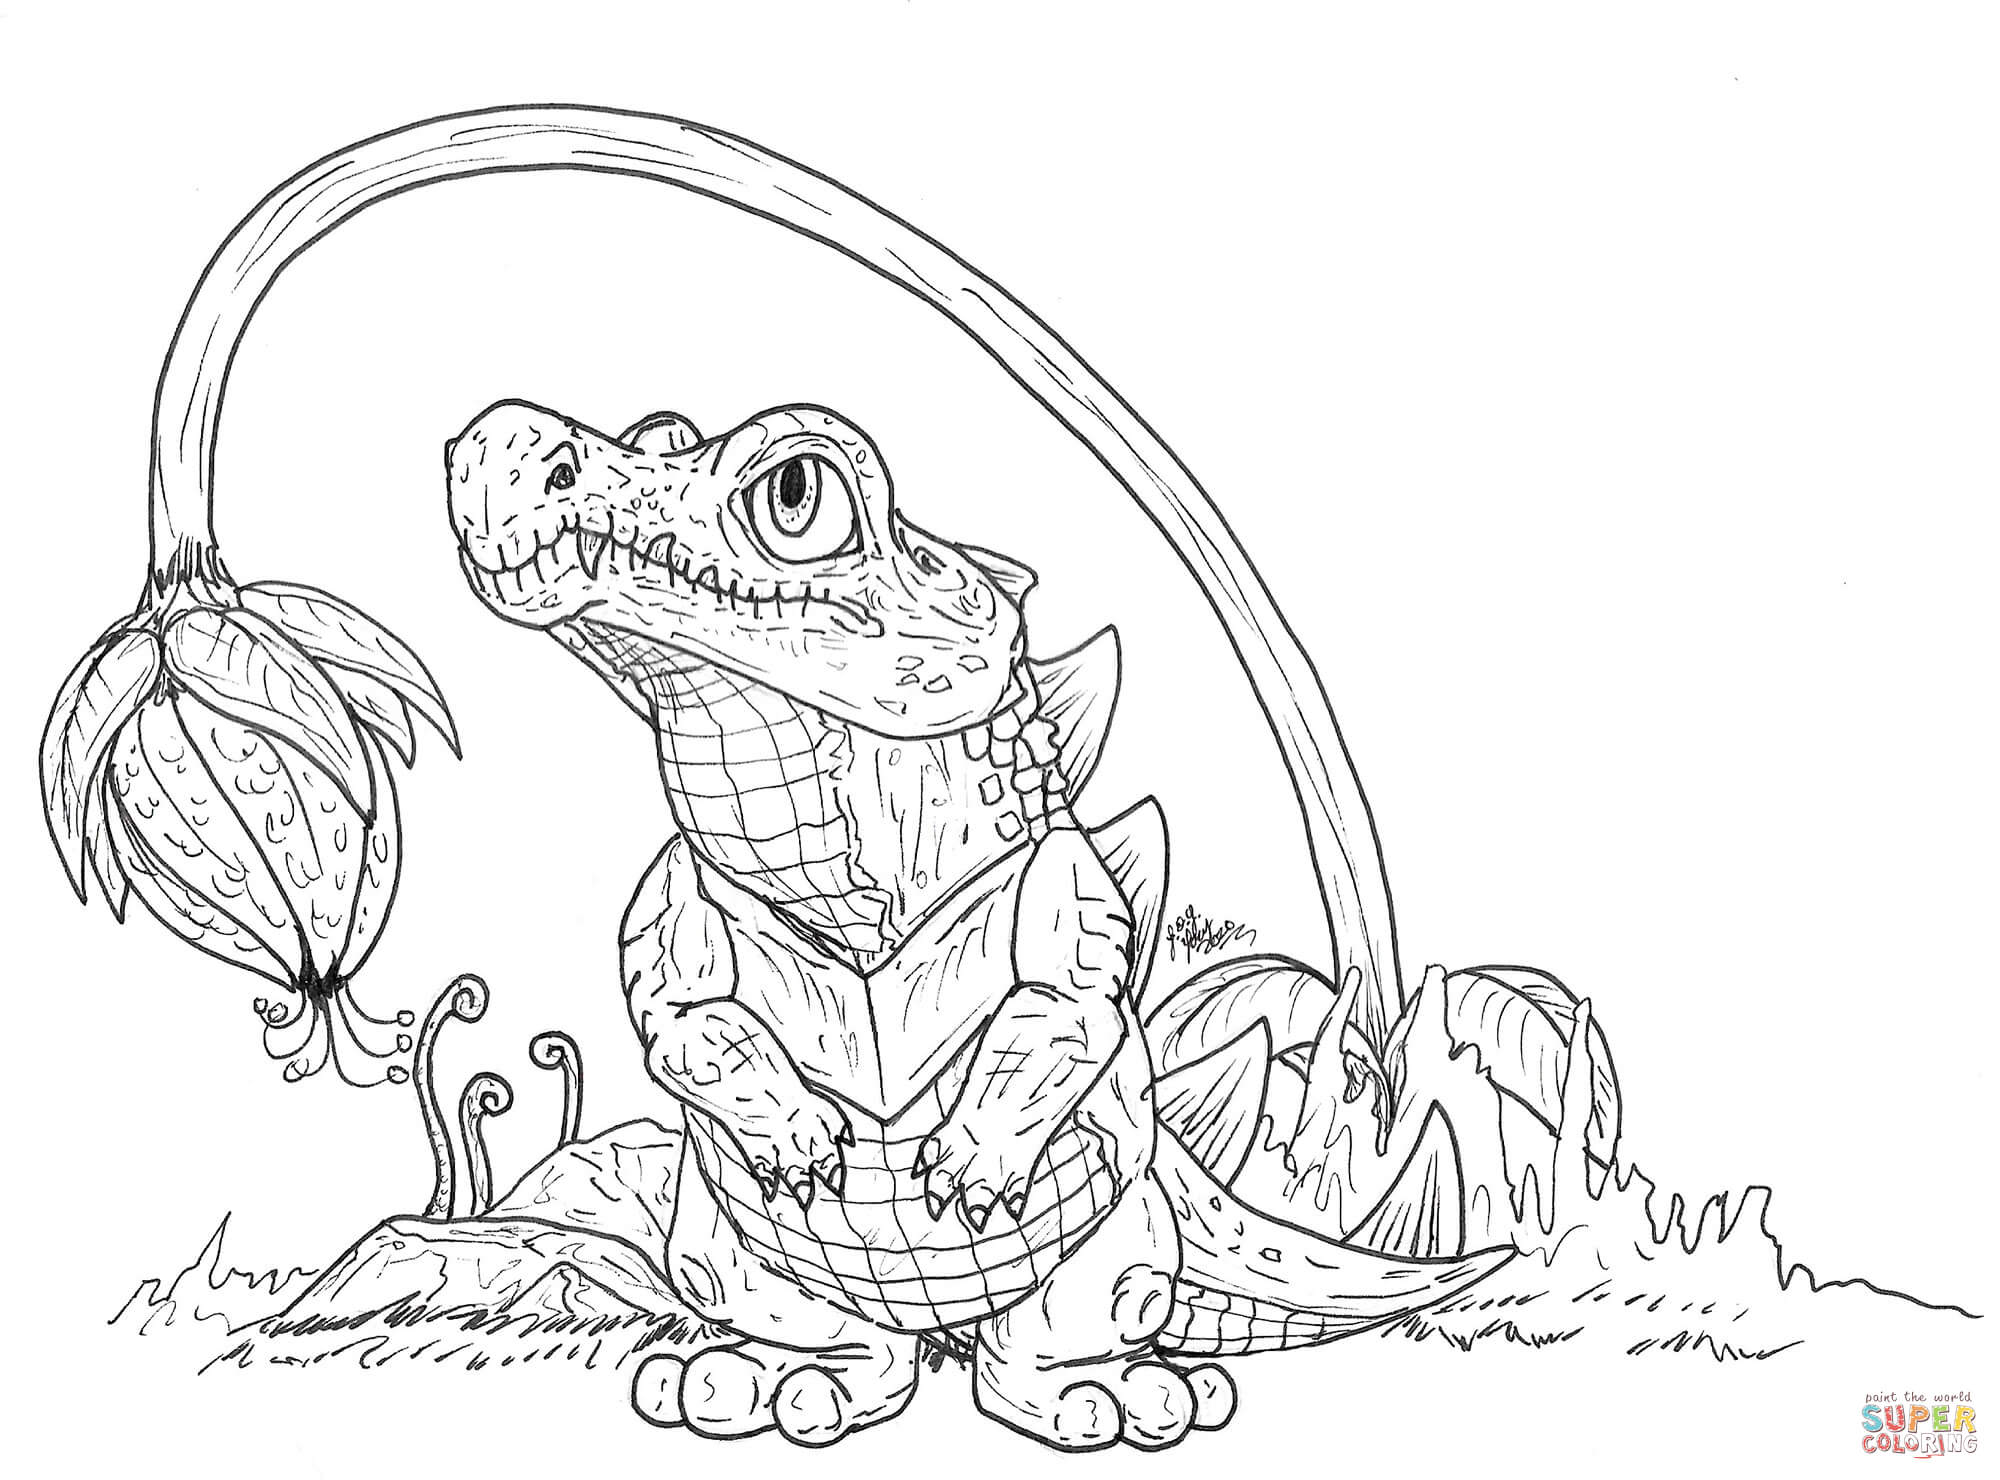 Totodile coloring page free printable coloring pages